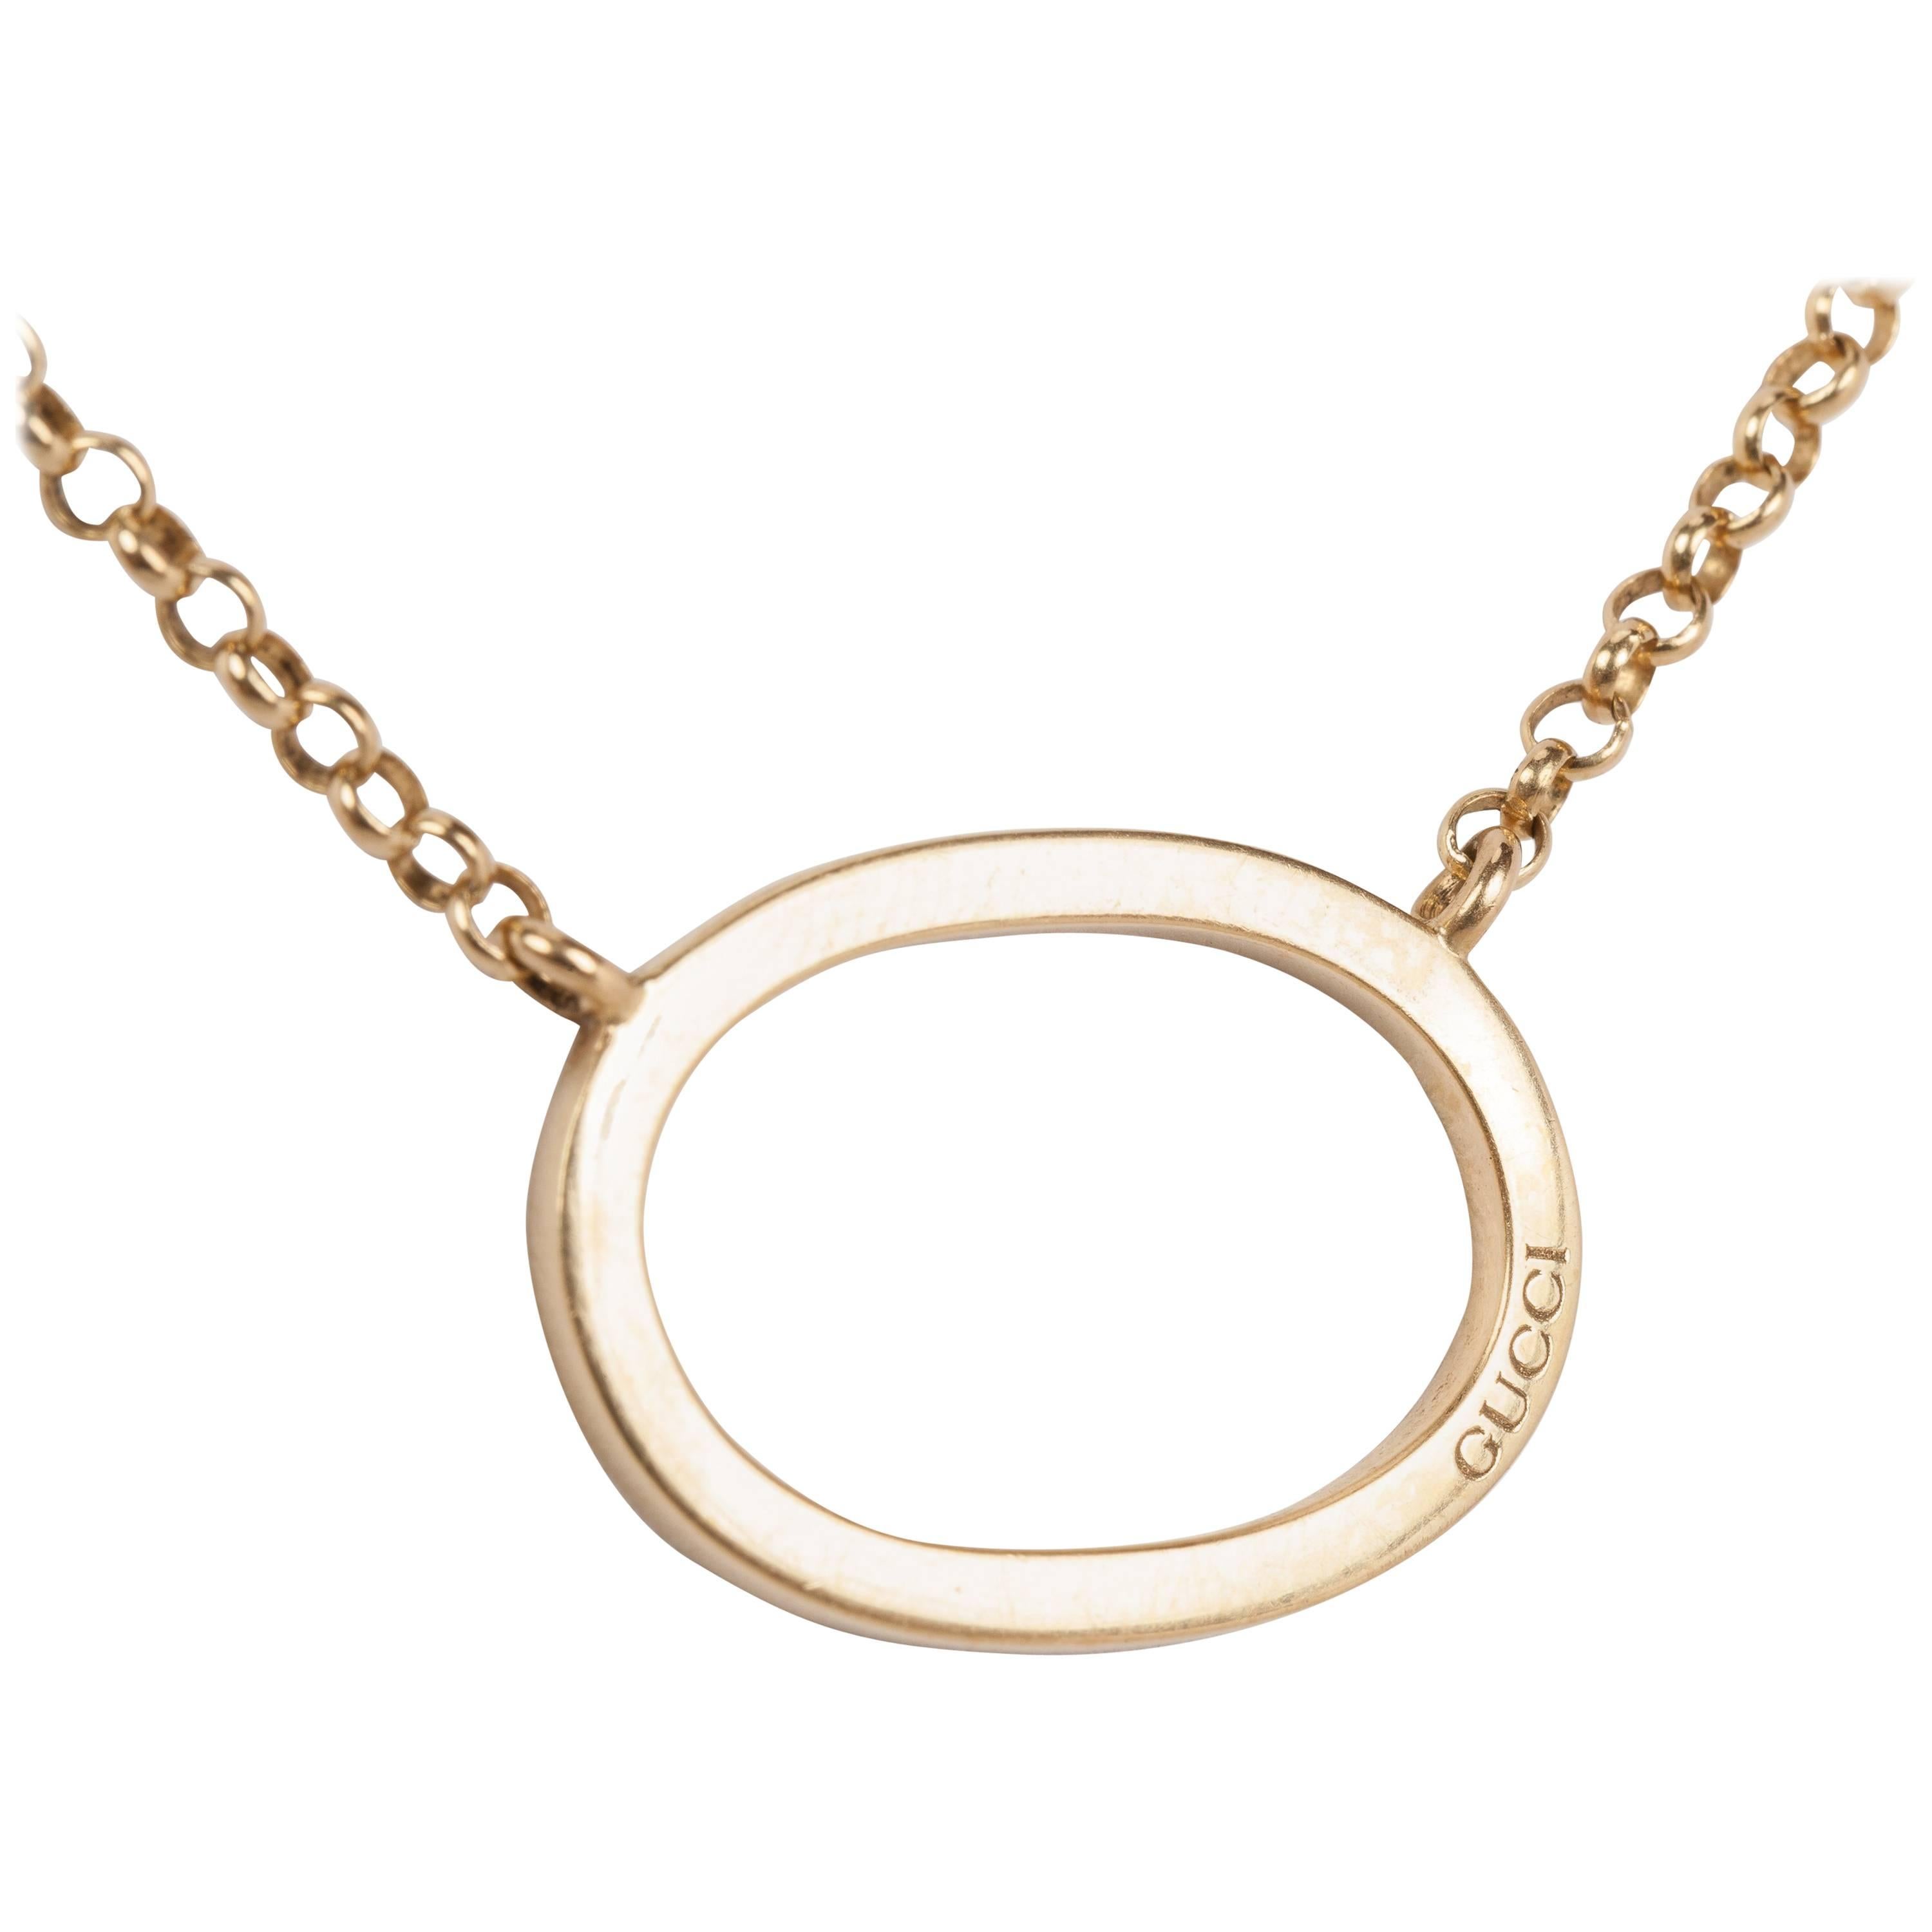 Gucci 18K Yellow Gold Oval Pendant Necklace